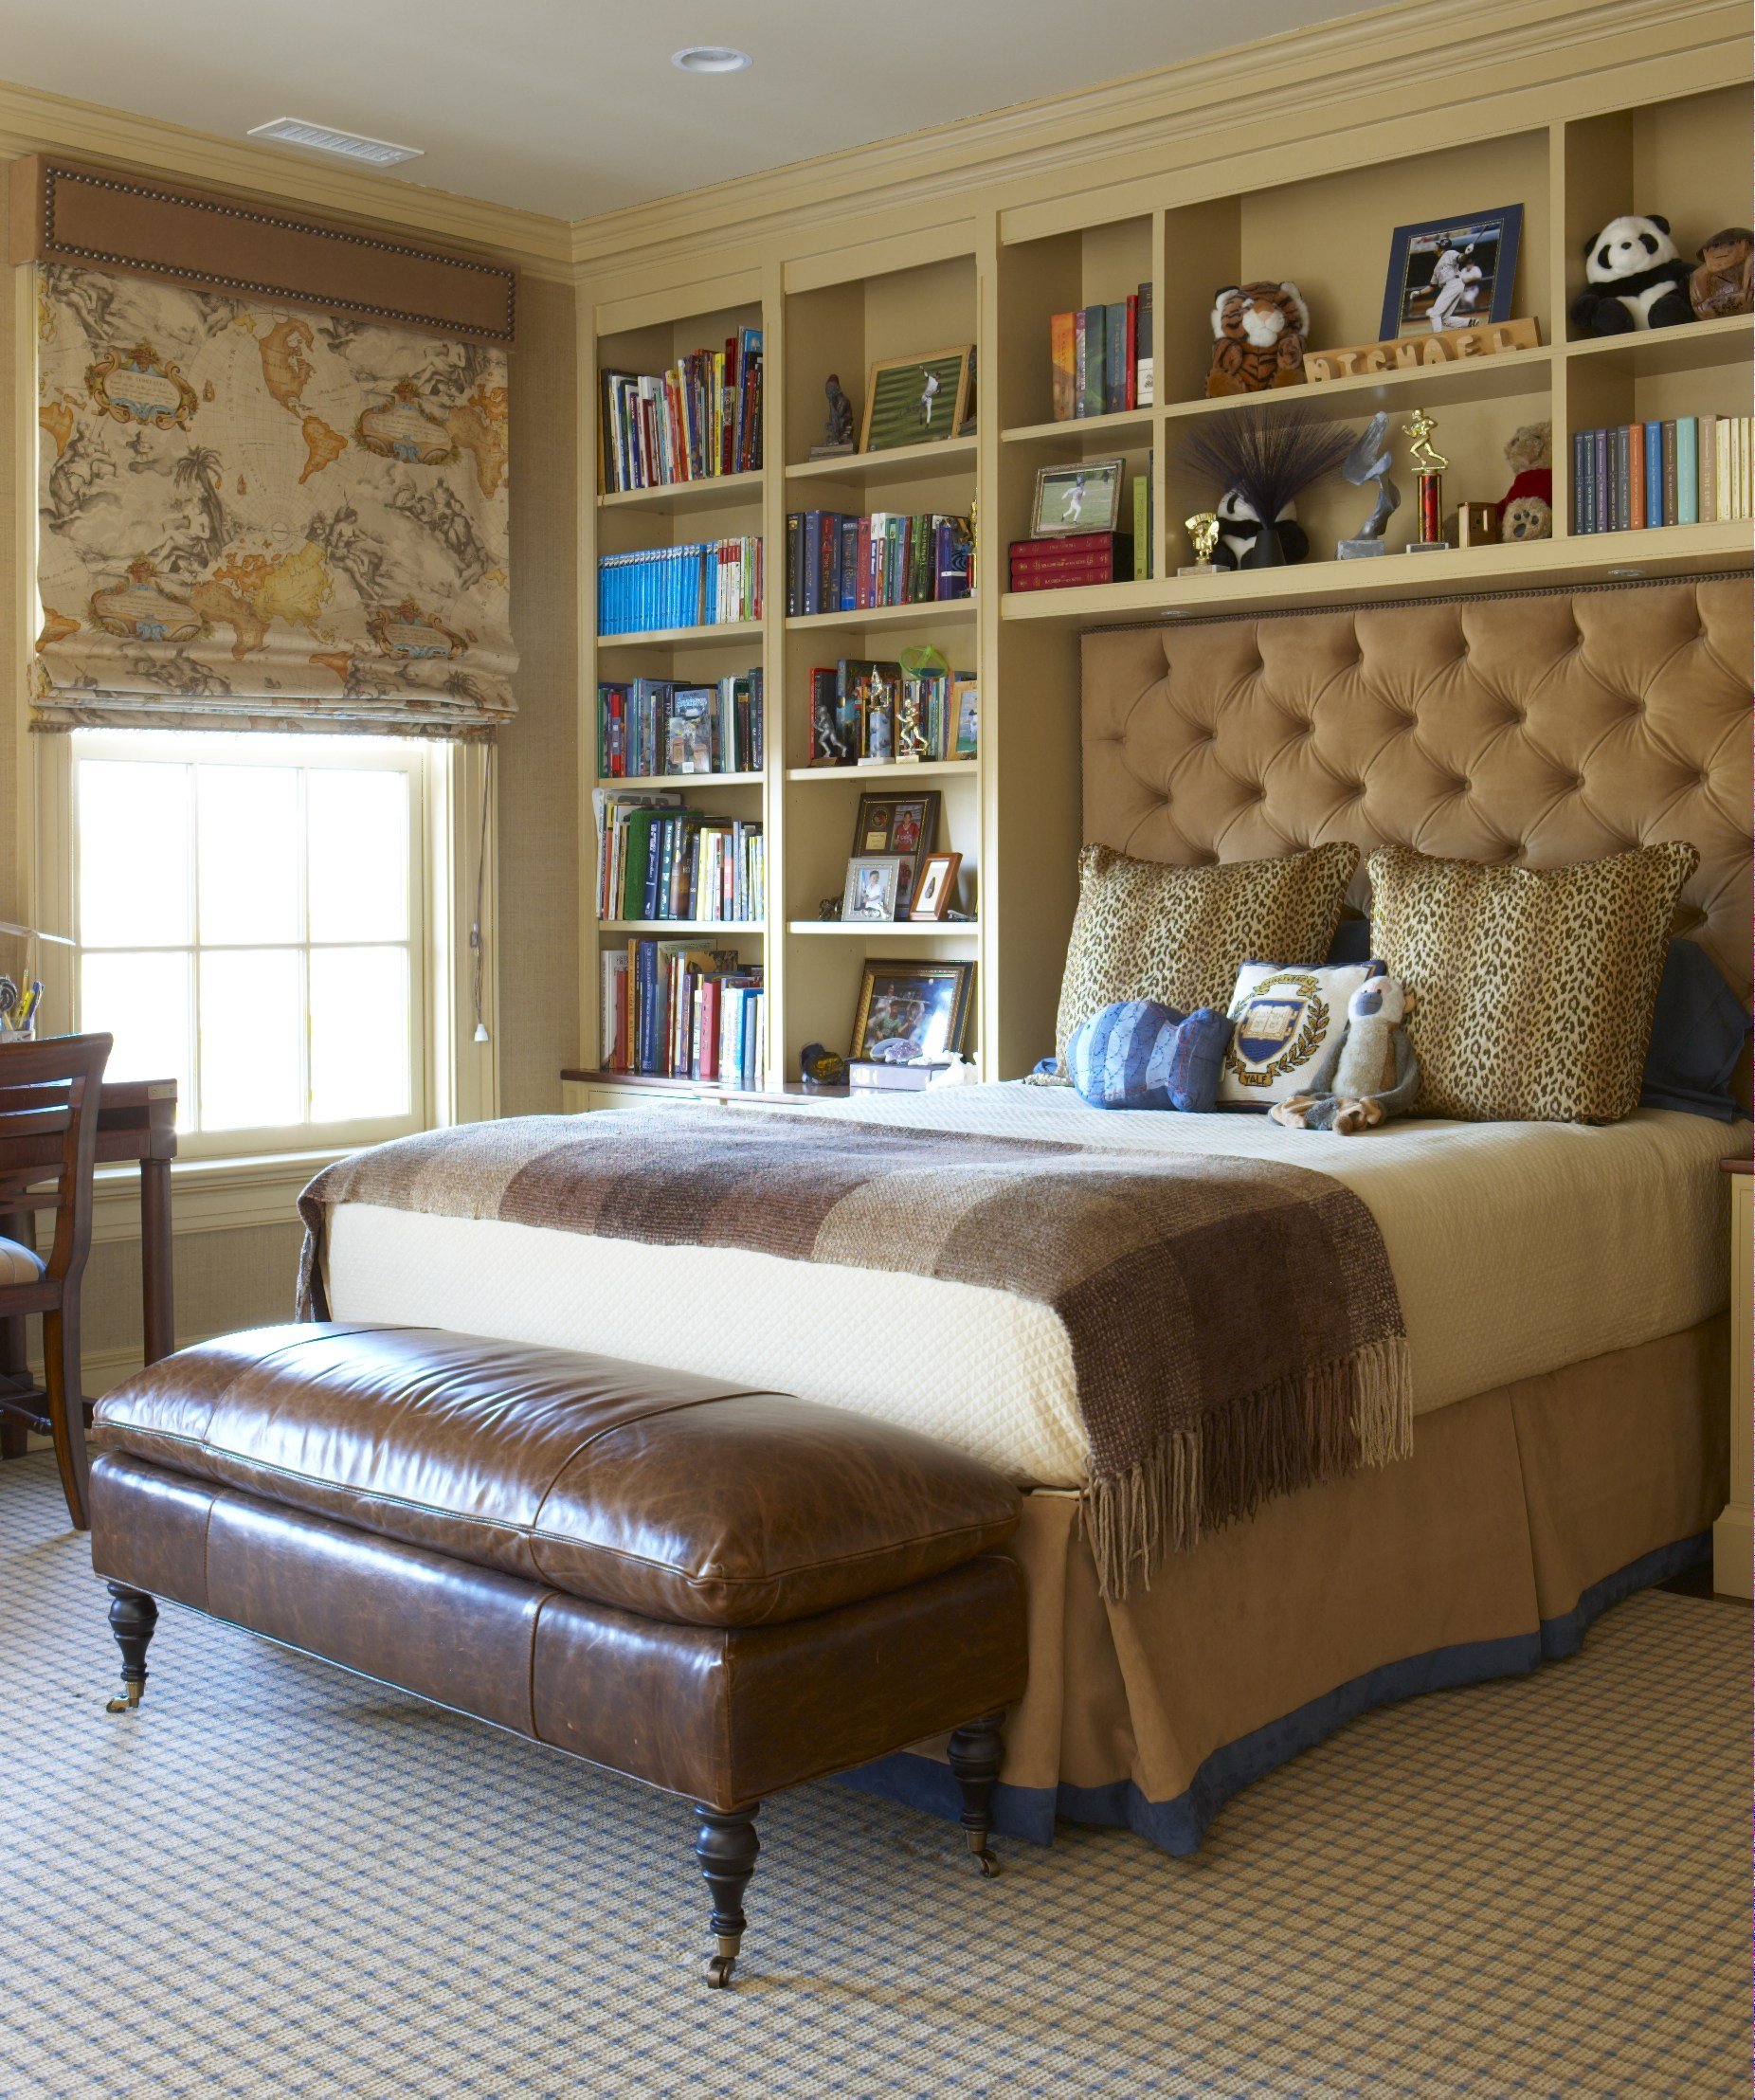 24-bedroom-storage-cubbies-warm-texture-detail-transitional-colonial-greenwich-connecticut.jpg